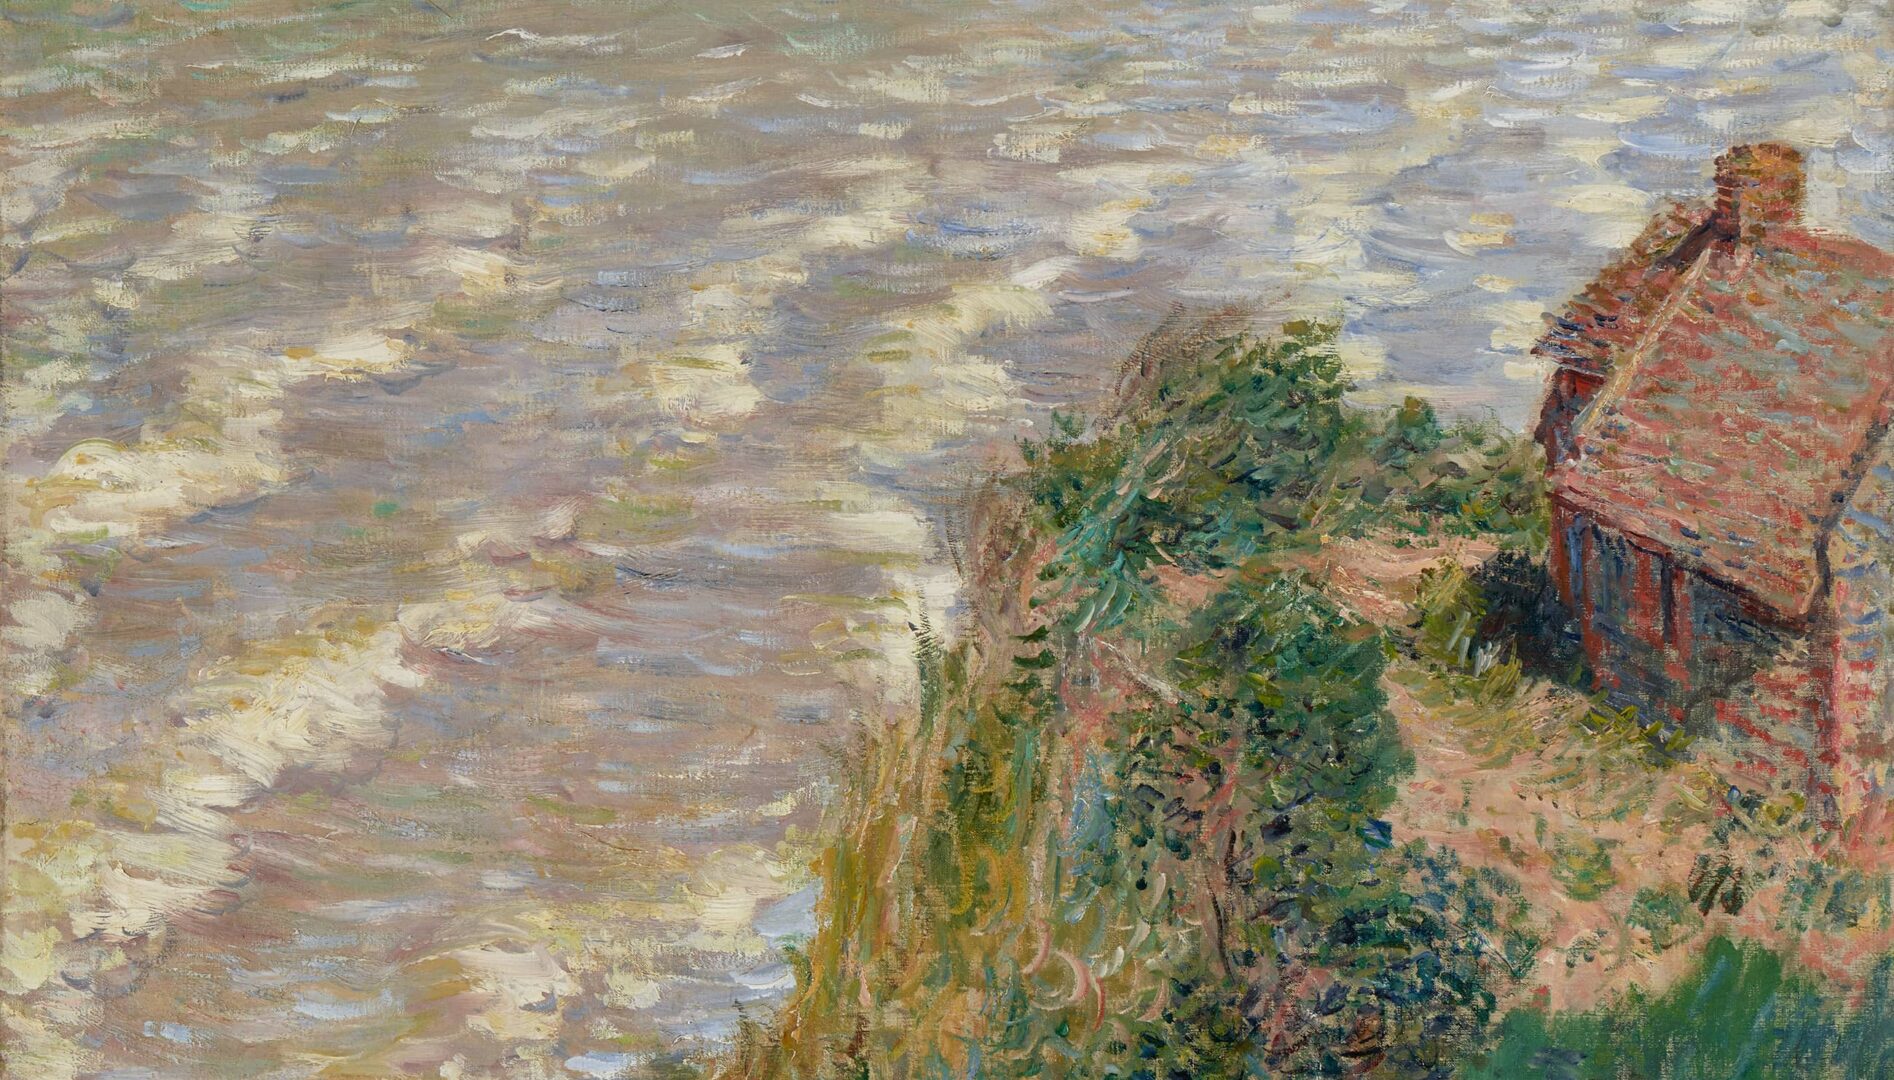 Painting in the impressionist style with a house in front of a body of water.